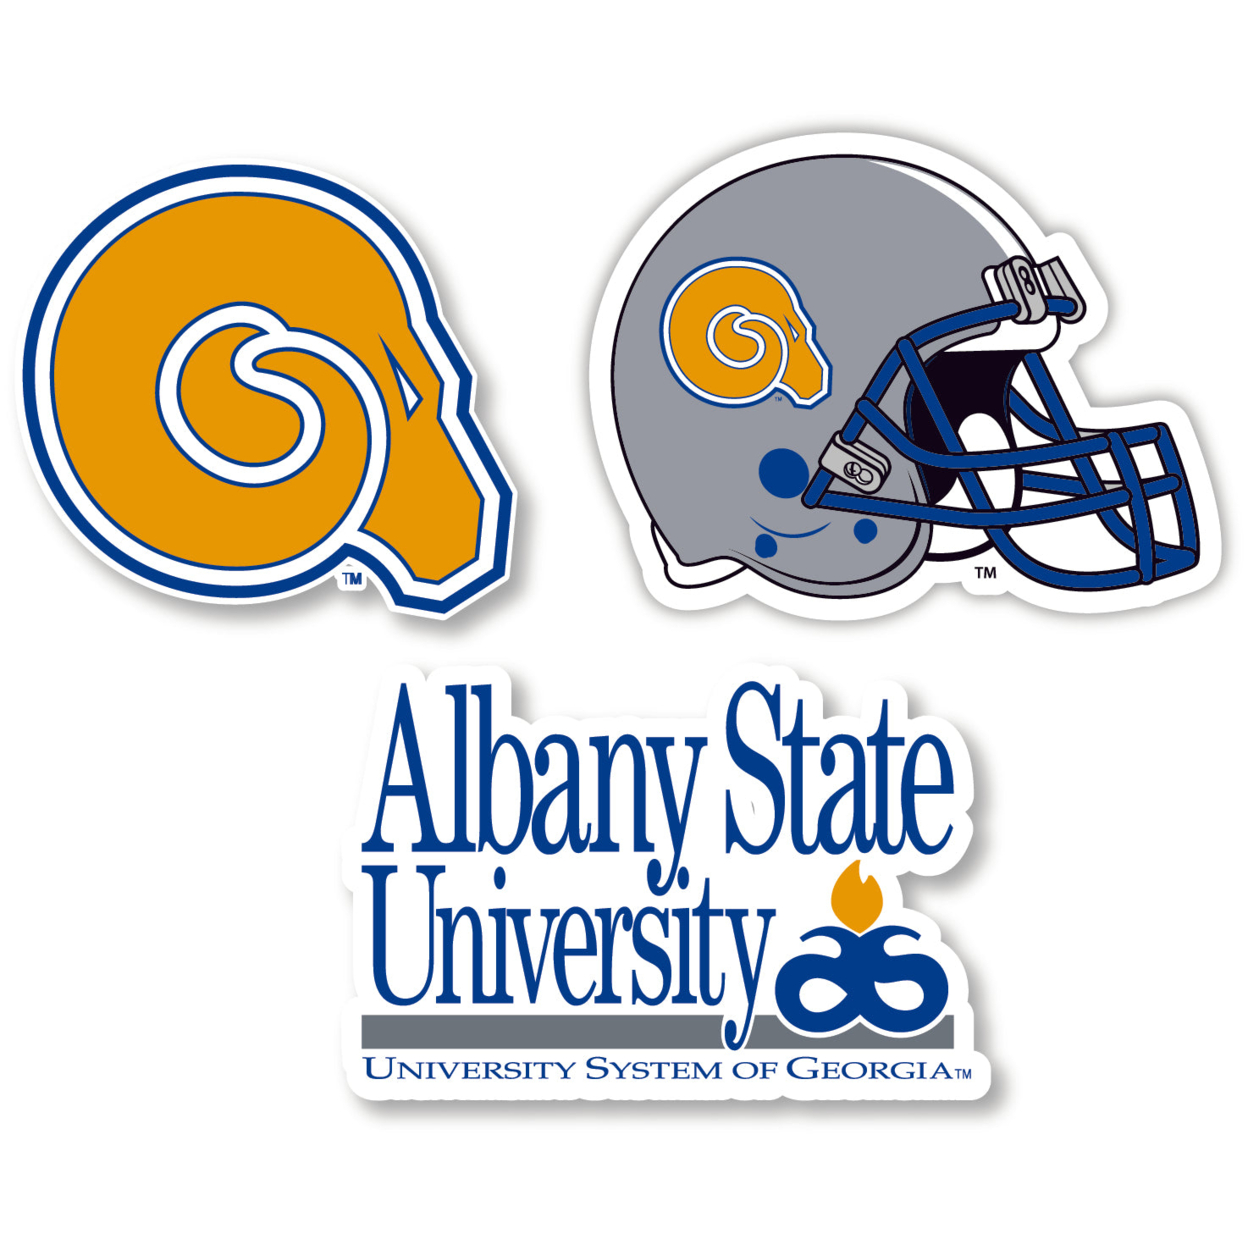 Albany State University Vinyl Decal Sticker 3 Pack 4-Inch Each